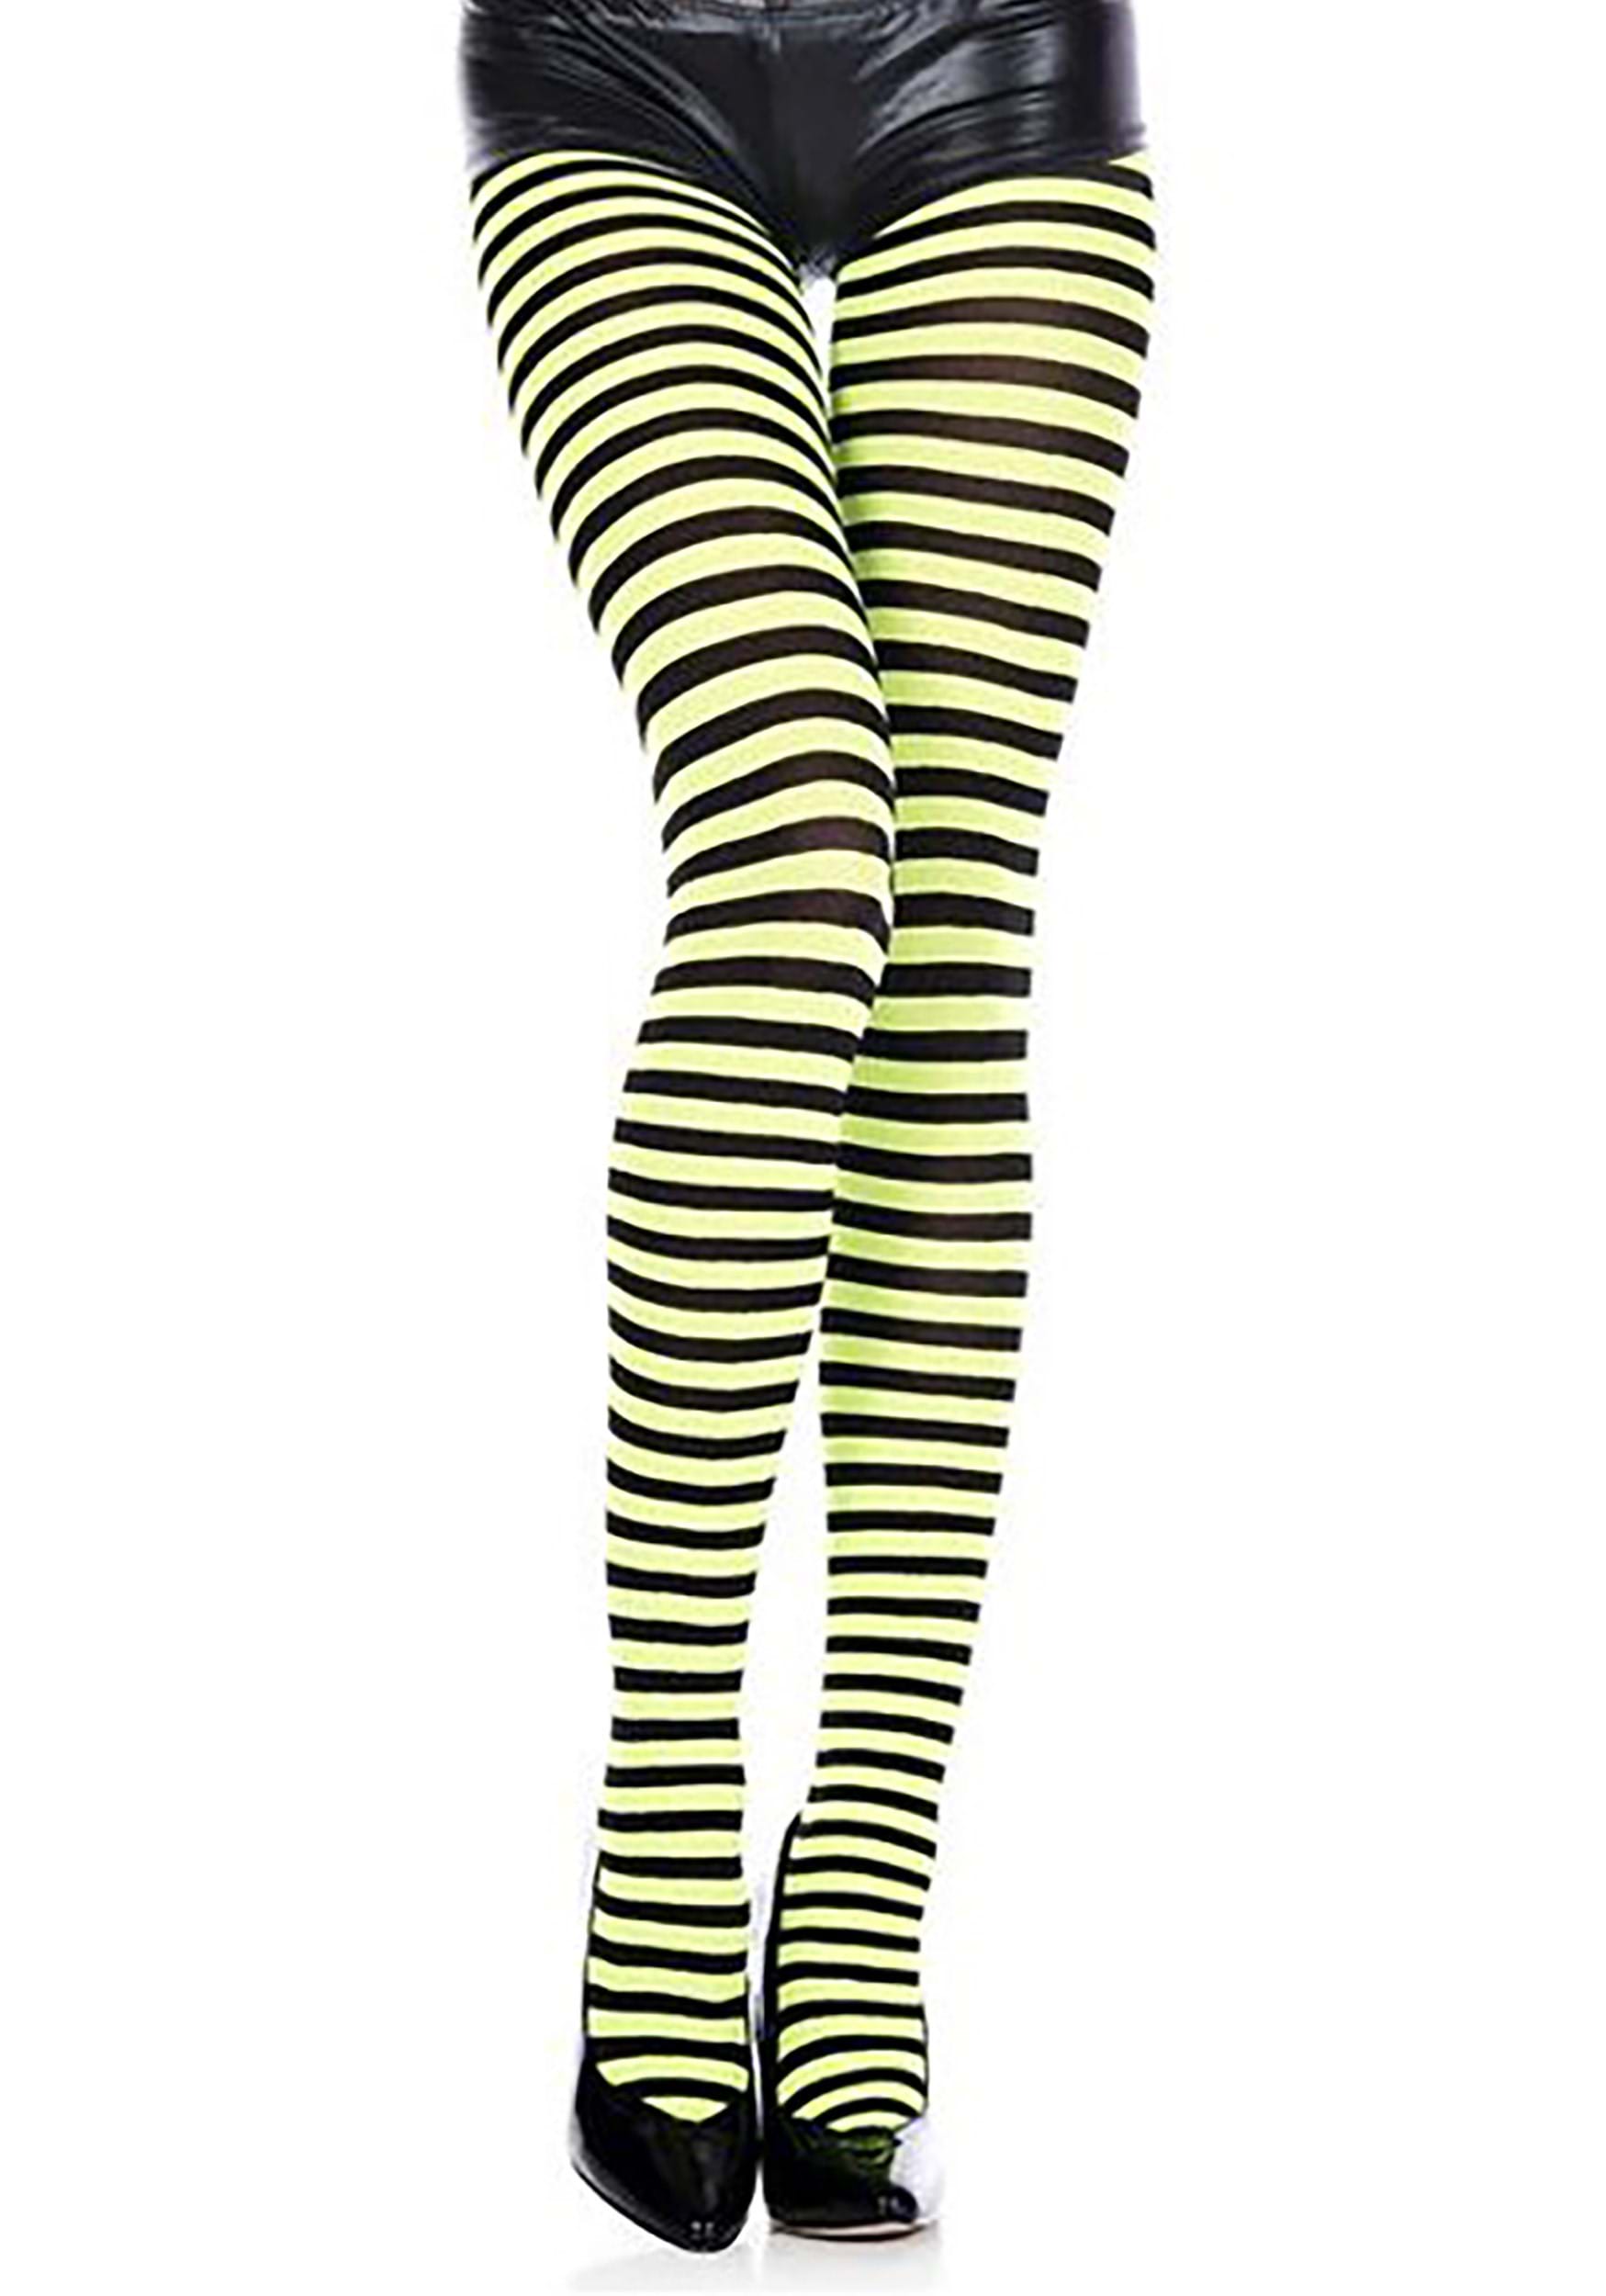 Womens Plus Size Striped Costume Tights Bold Colored Stockings